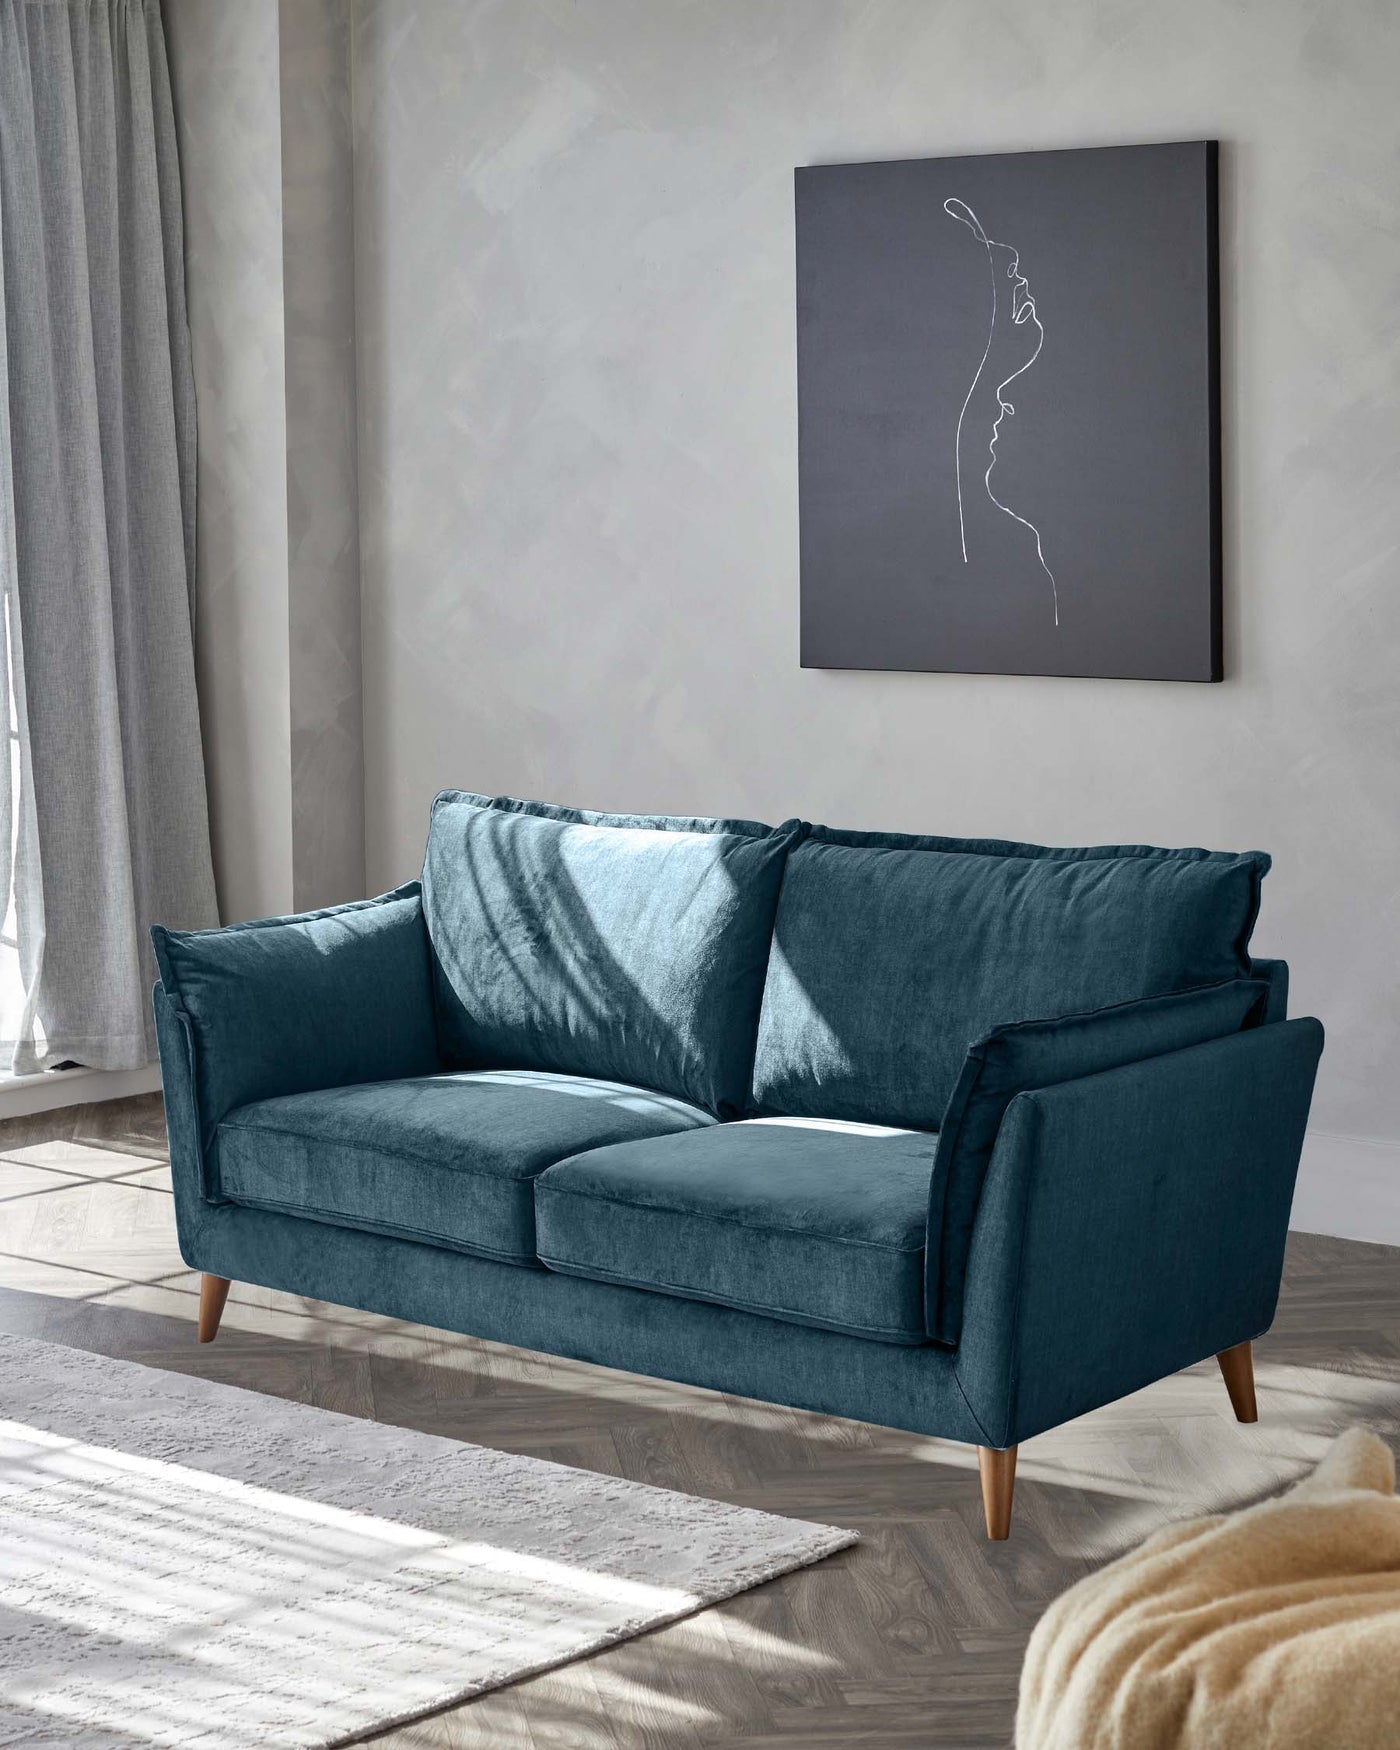 Elegant three-seater sofa in a deep teal blue velvet fabric, featuring plush cushions and a clean silhouette with square armrests. The couch stands on four tapered wooden legs and is complemented by two matching velvet throw pillows.